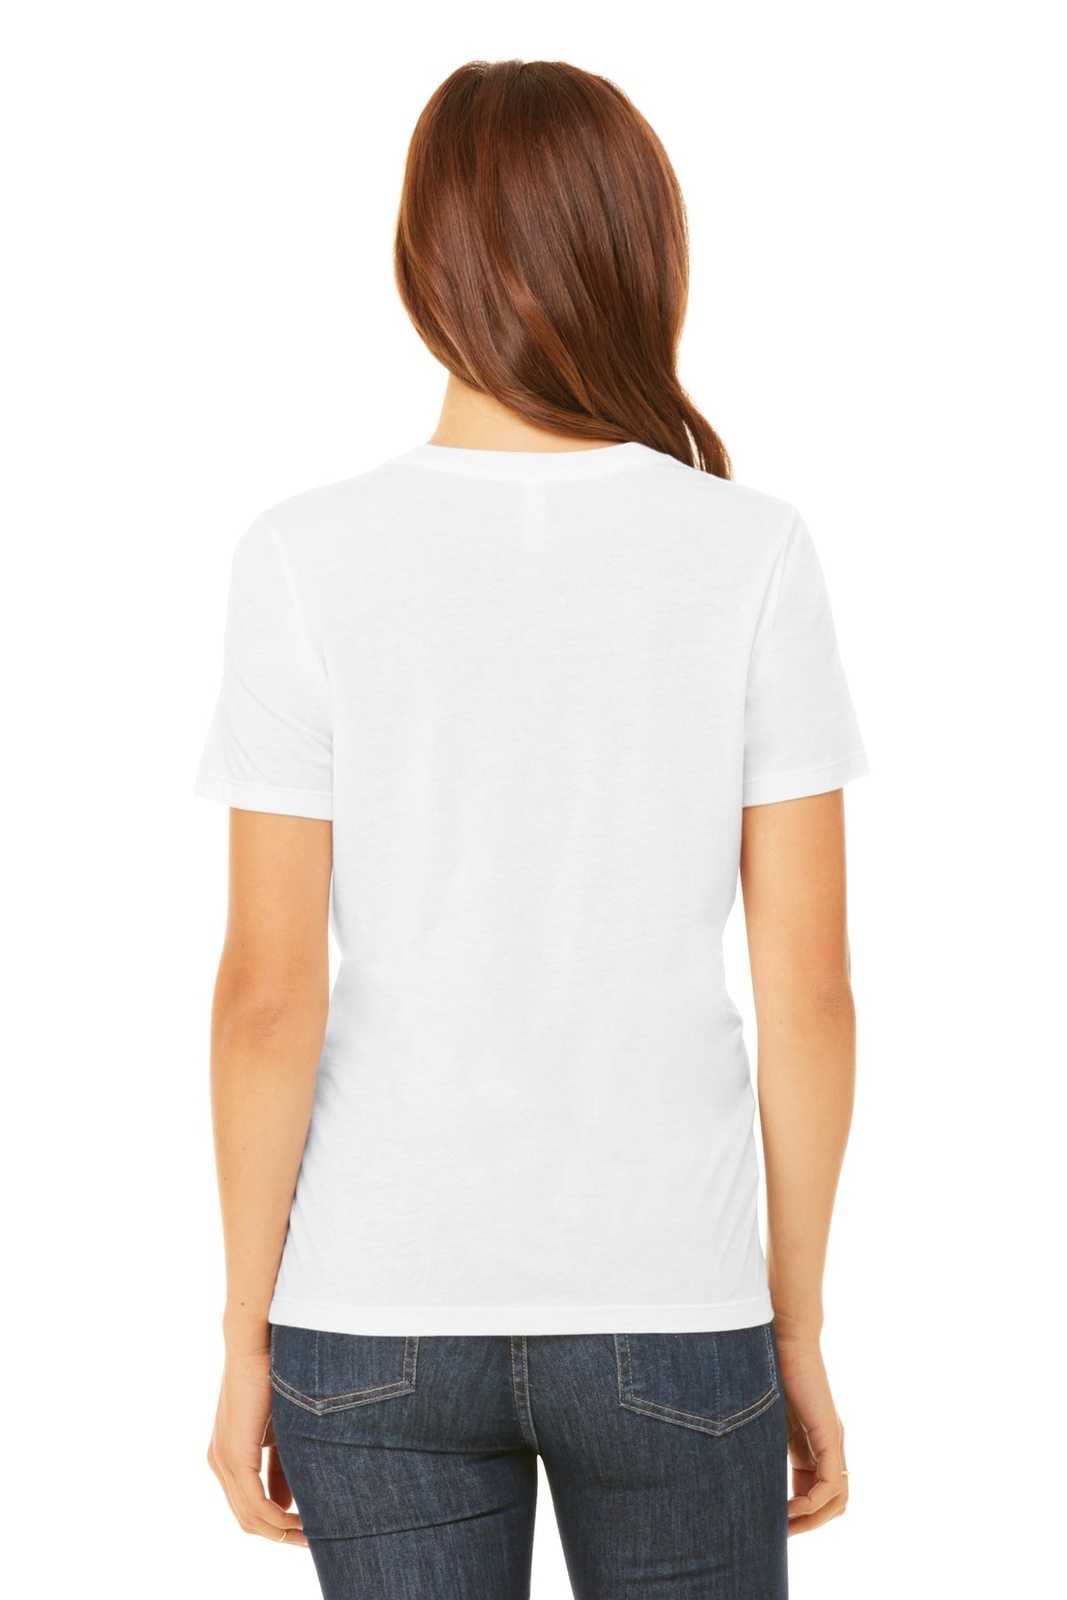 Bella + Canvas 6400 Women's Relaxed Jersey Short Sleeve Tee - White - HIT a Double